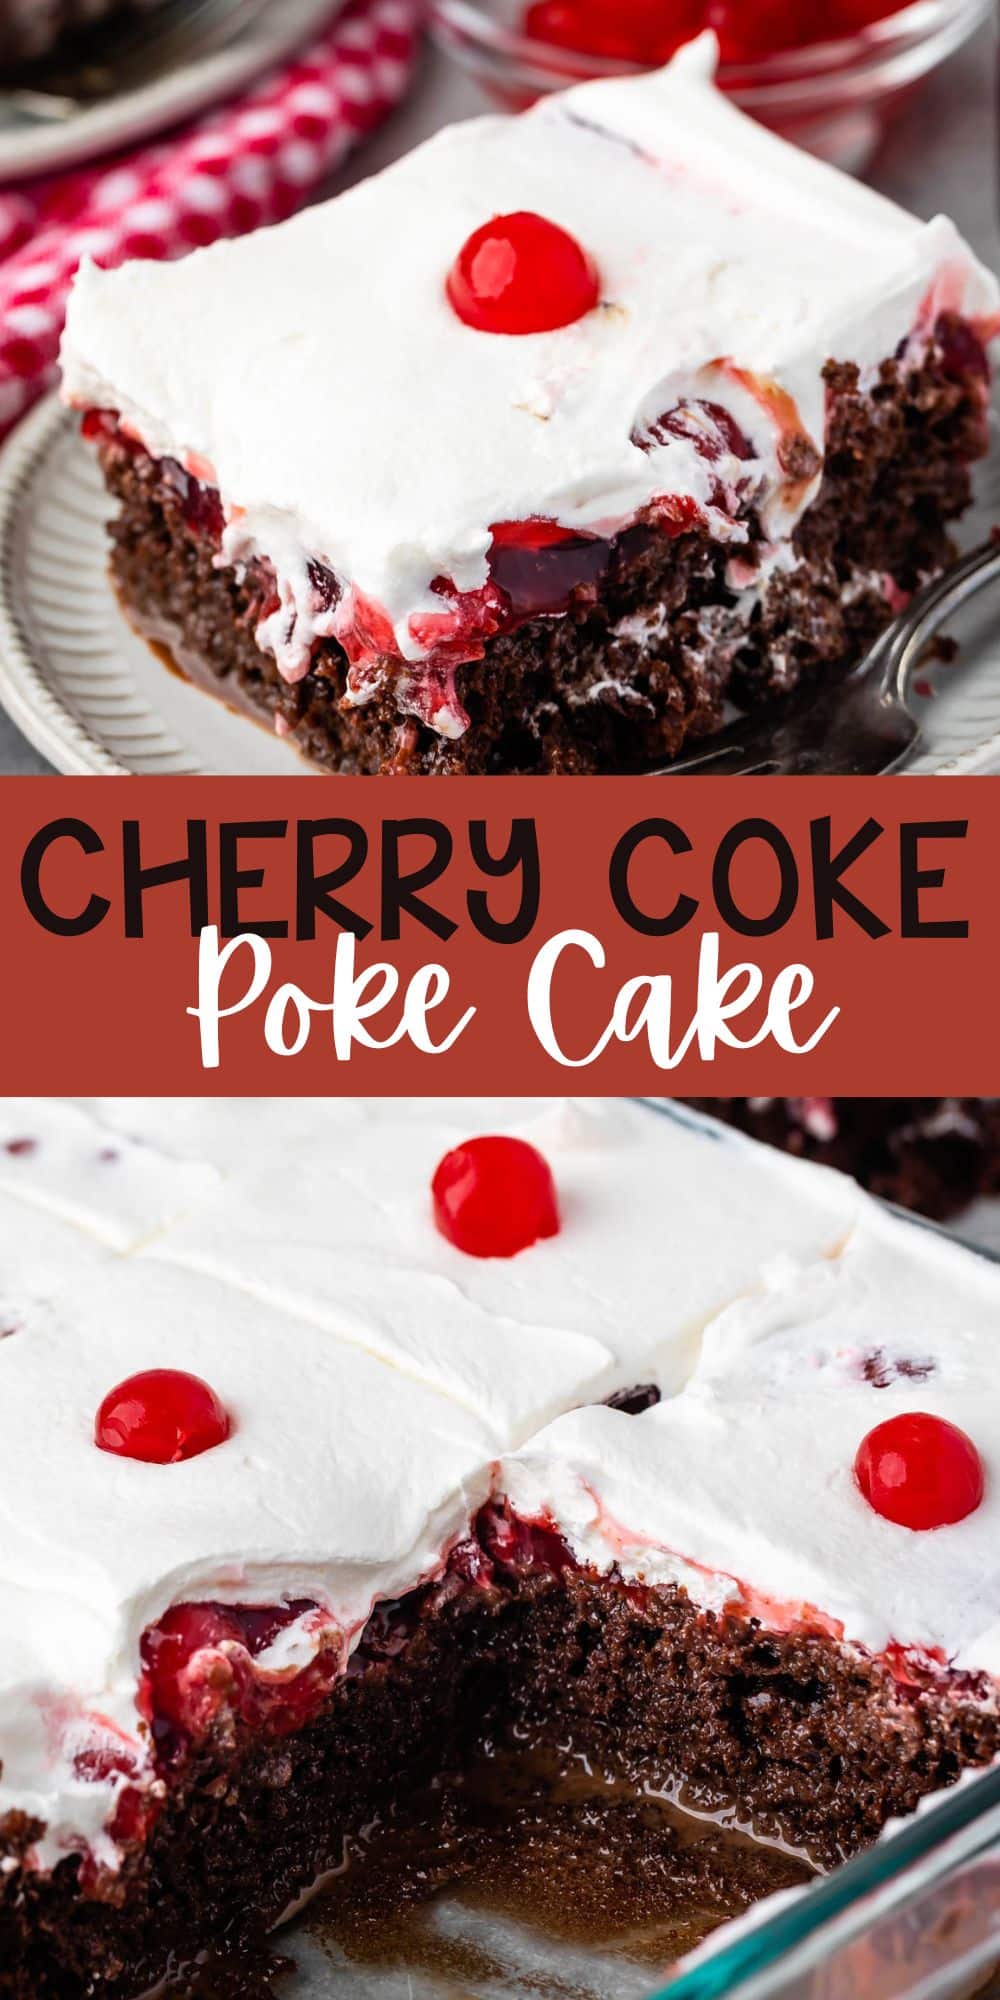 two photos of cherry coke cake topped with white topping and a cherry with words on the images.